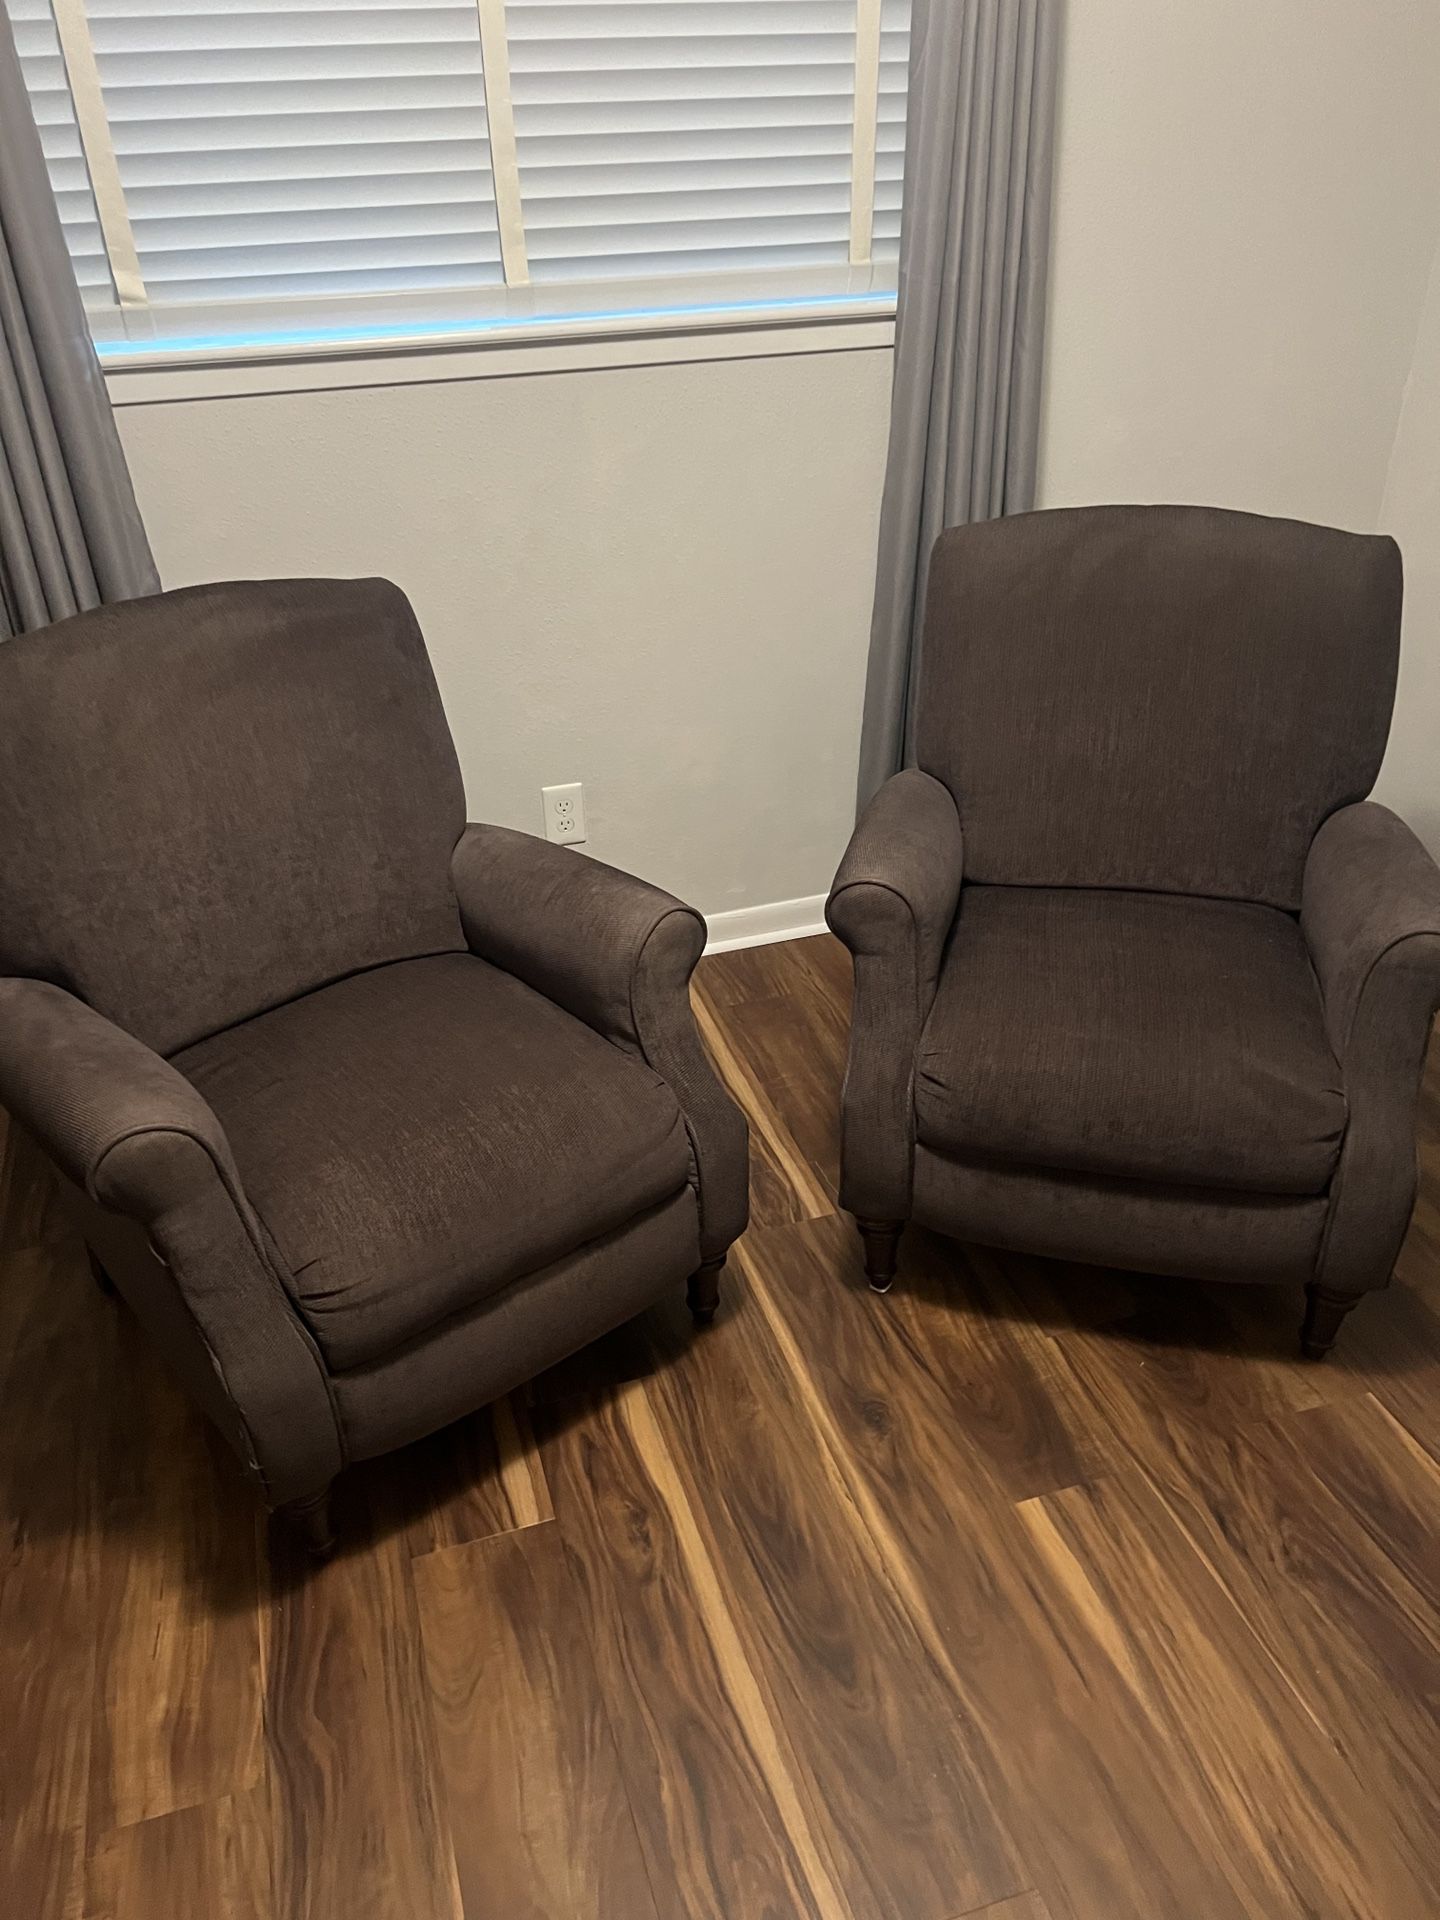 Recliner/chairs